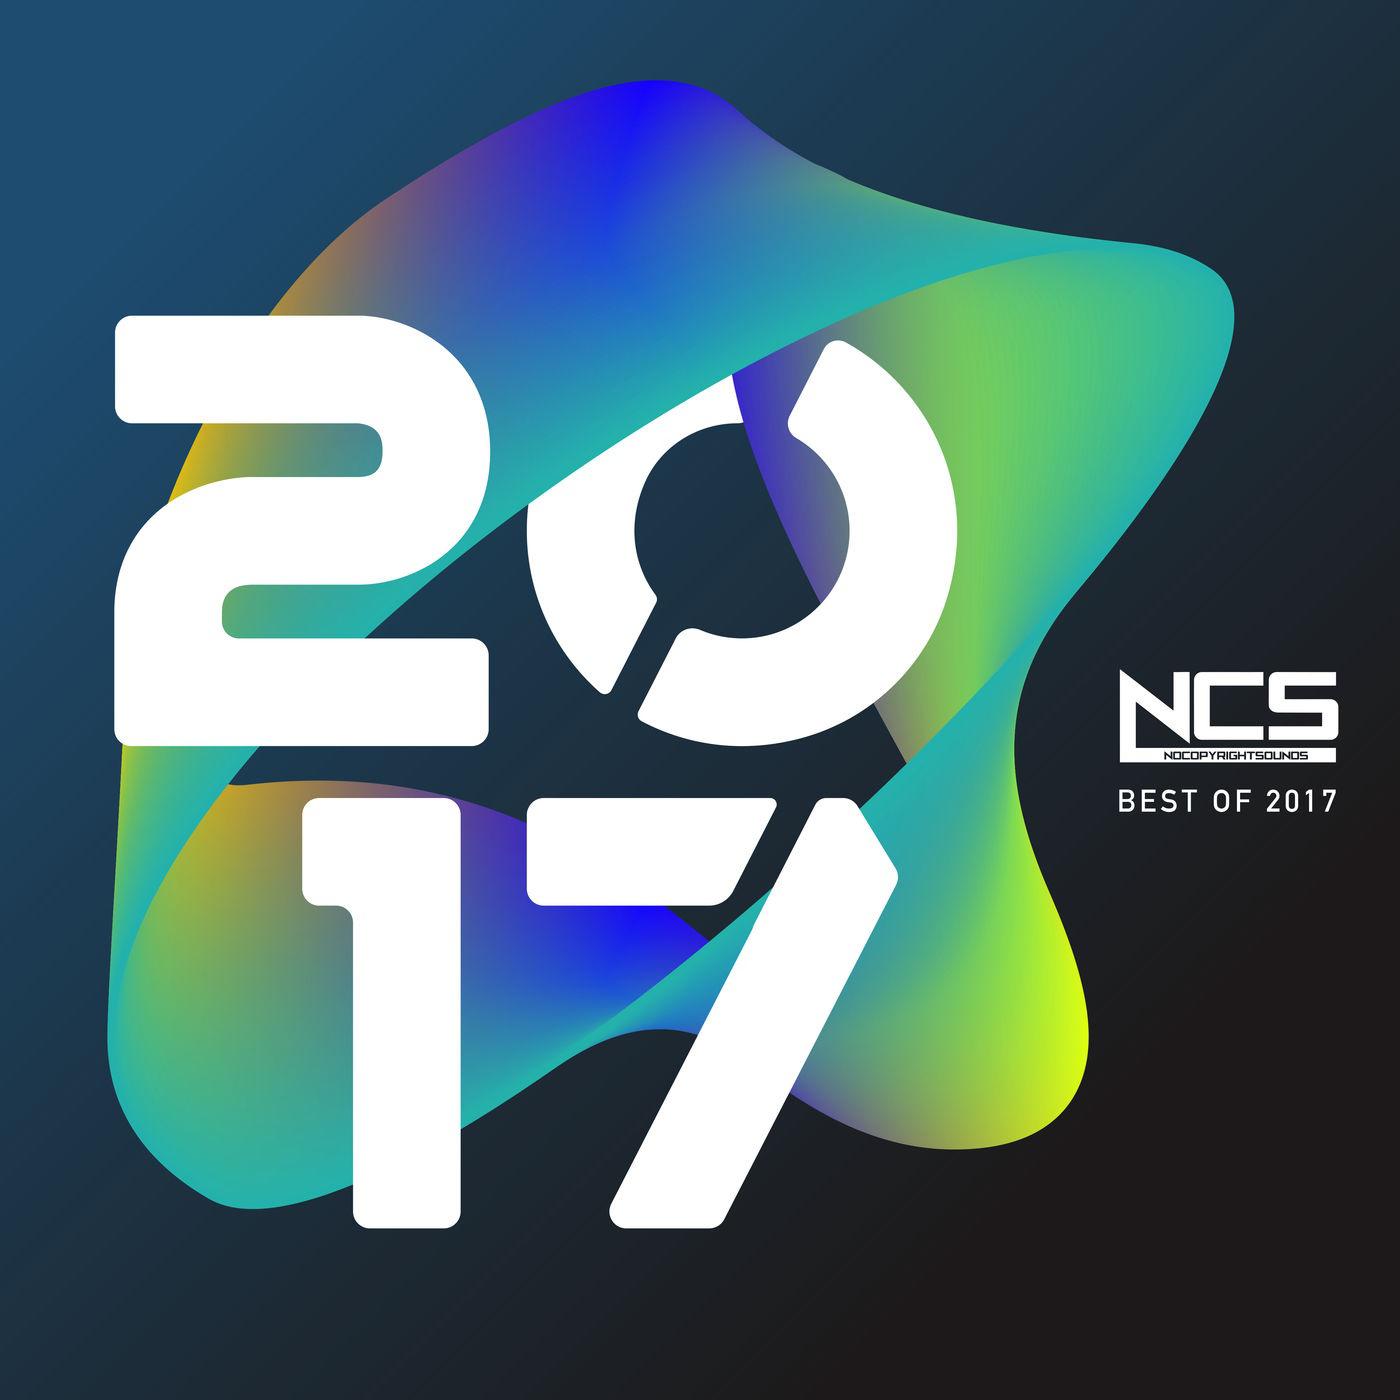 NCS: The Best of 2017 (Continuous Mix)